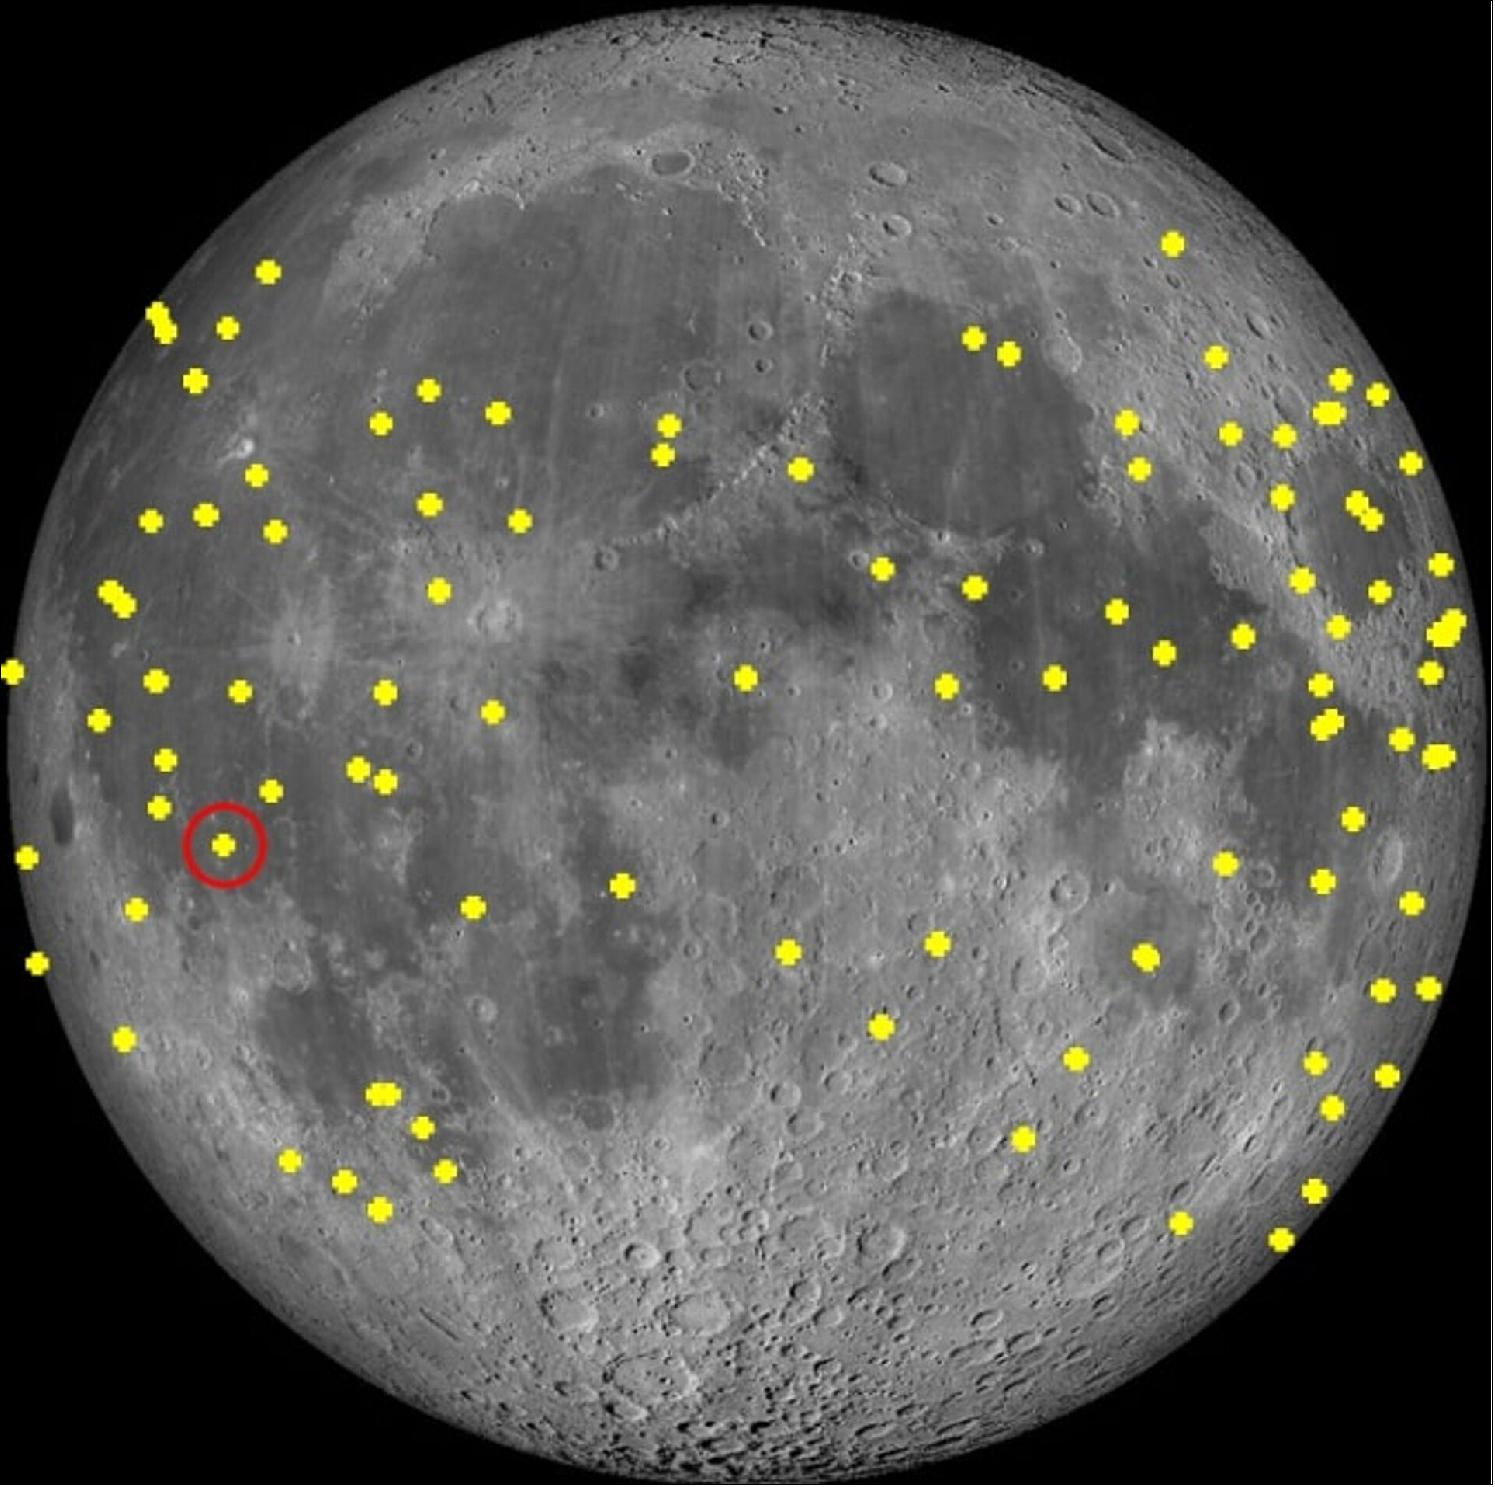 Figure 7: Locations of the 102 validated flashes observed by the NELIOTA project (in yellow) up to 27 March 2020. The flash in the red circle was also detected by the team of the Sharjah Academy for Astronomy, Space sciences & Technology, UAE. The lunar north pole is at the top (image credit: ESA / NELIOTA)